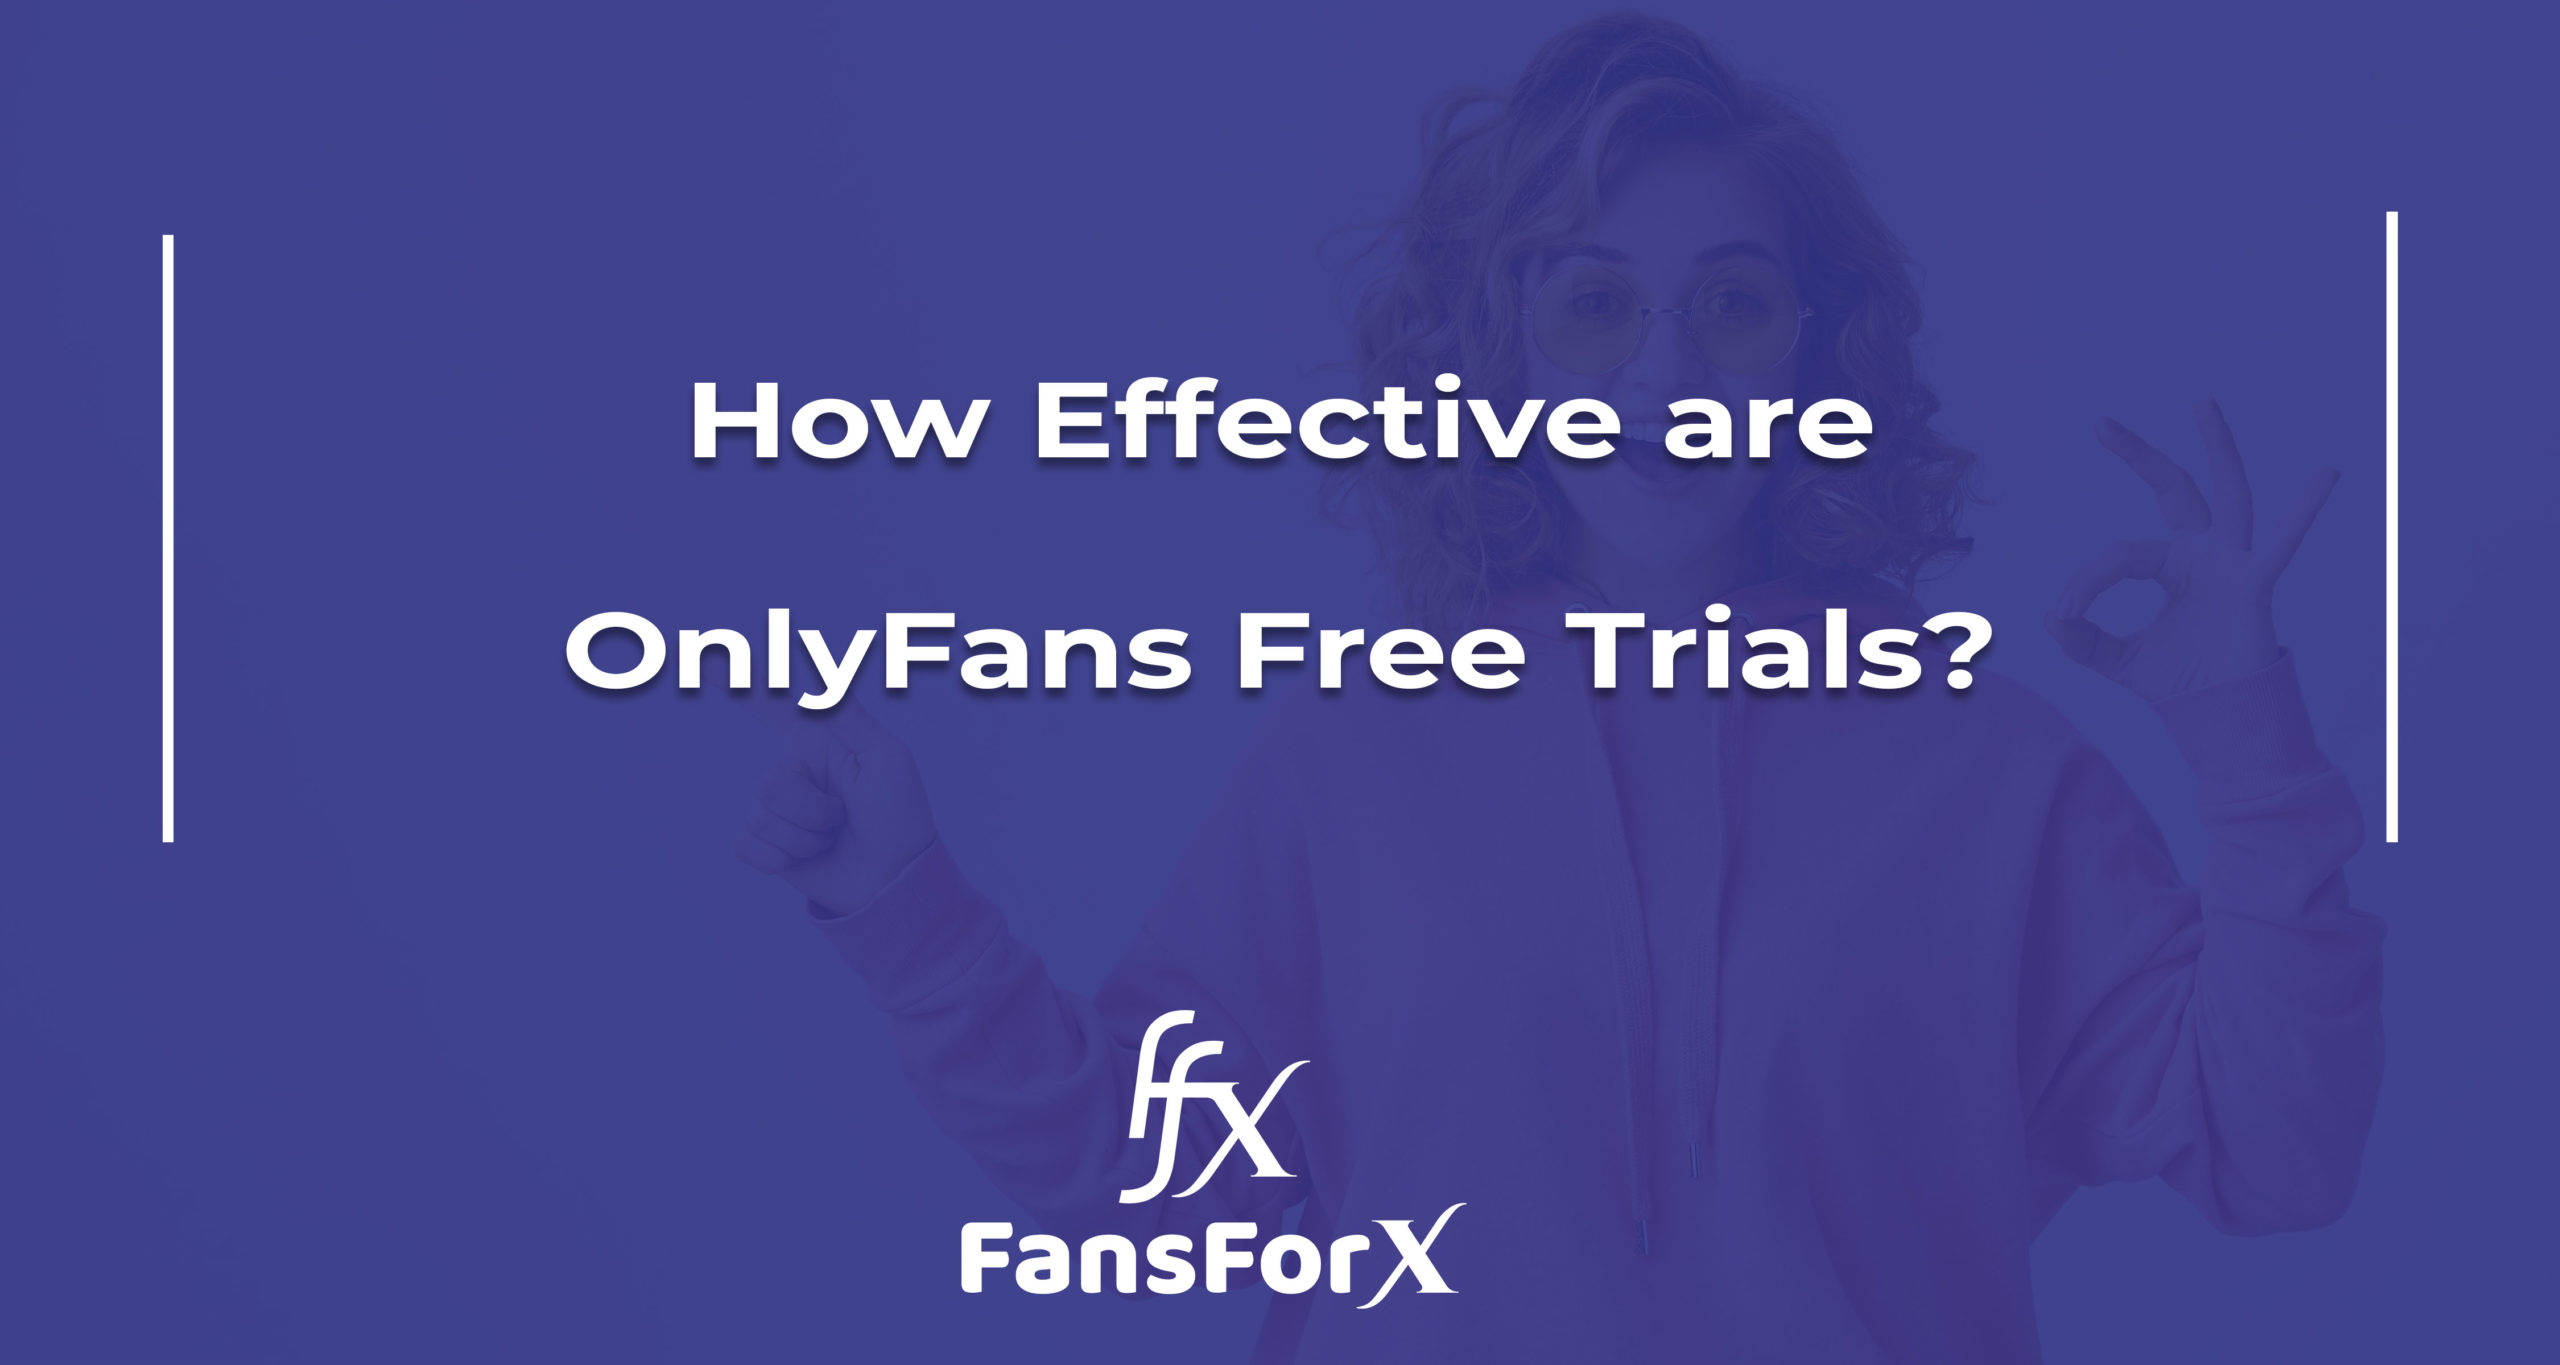 Only fans free trials